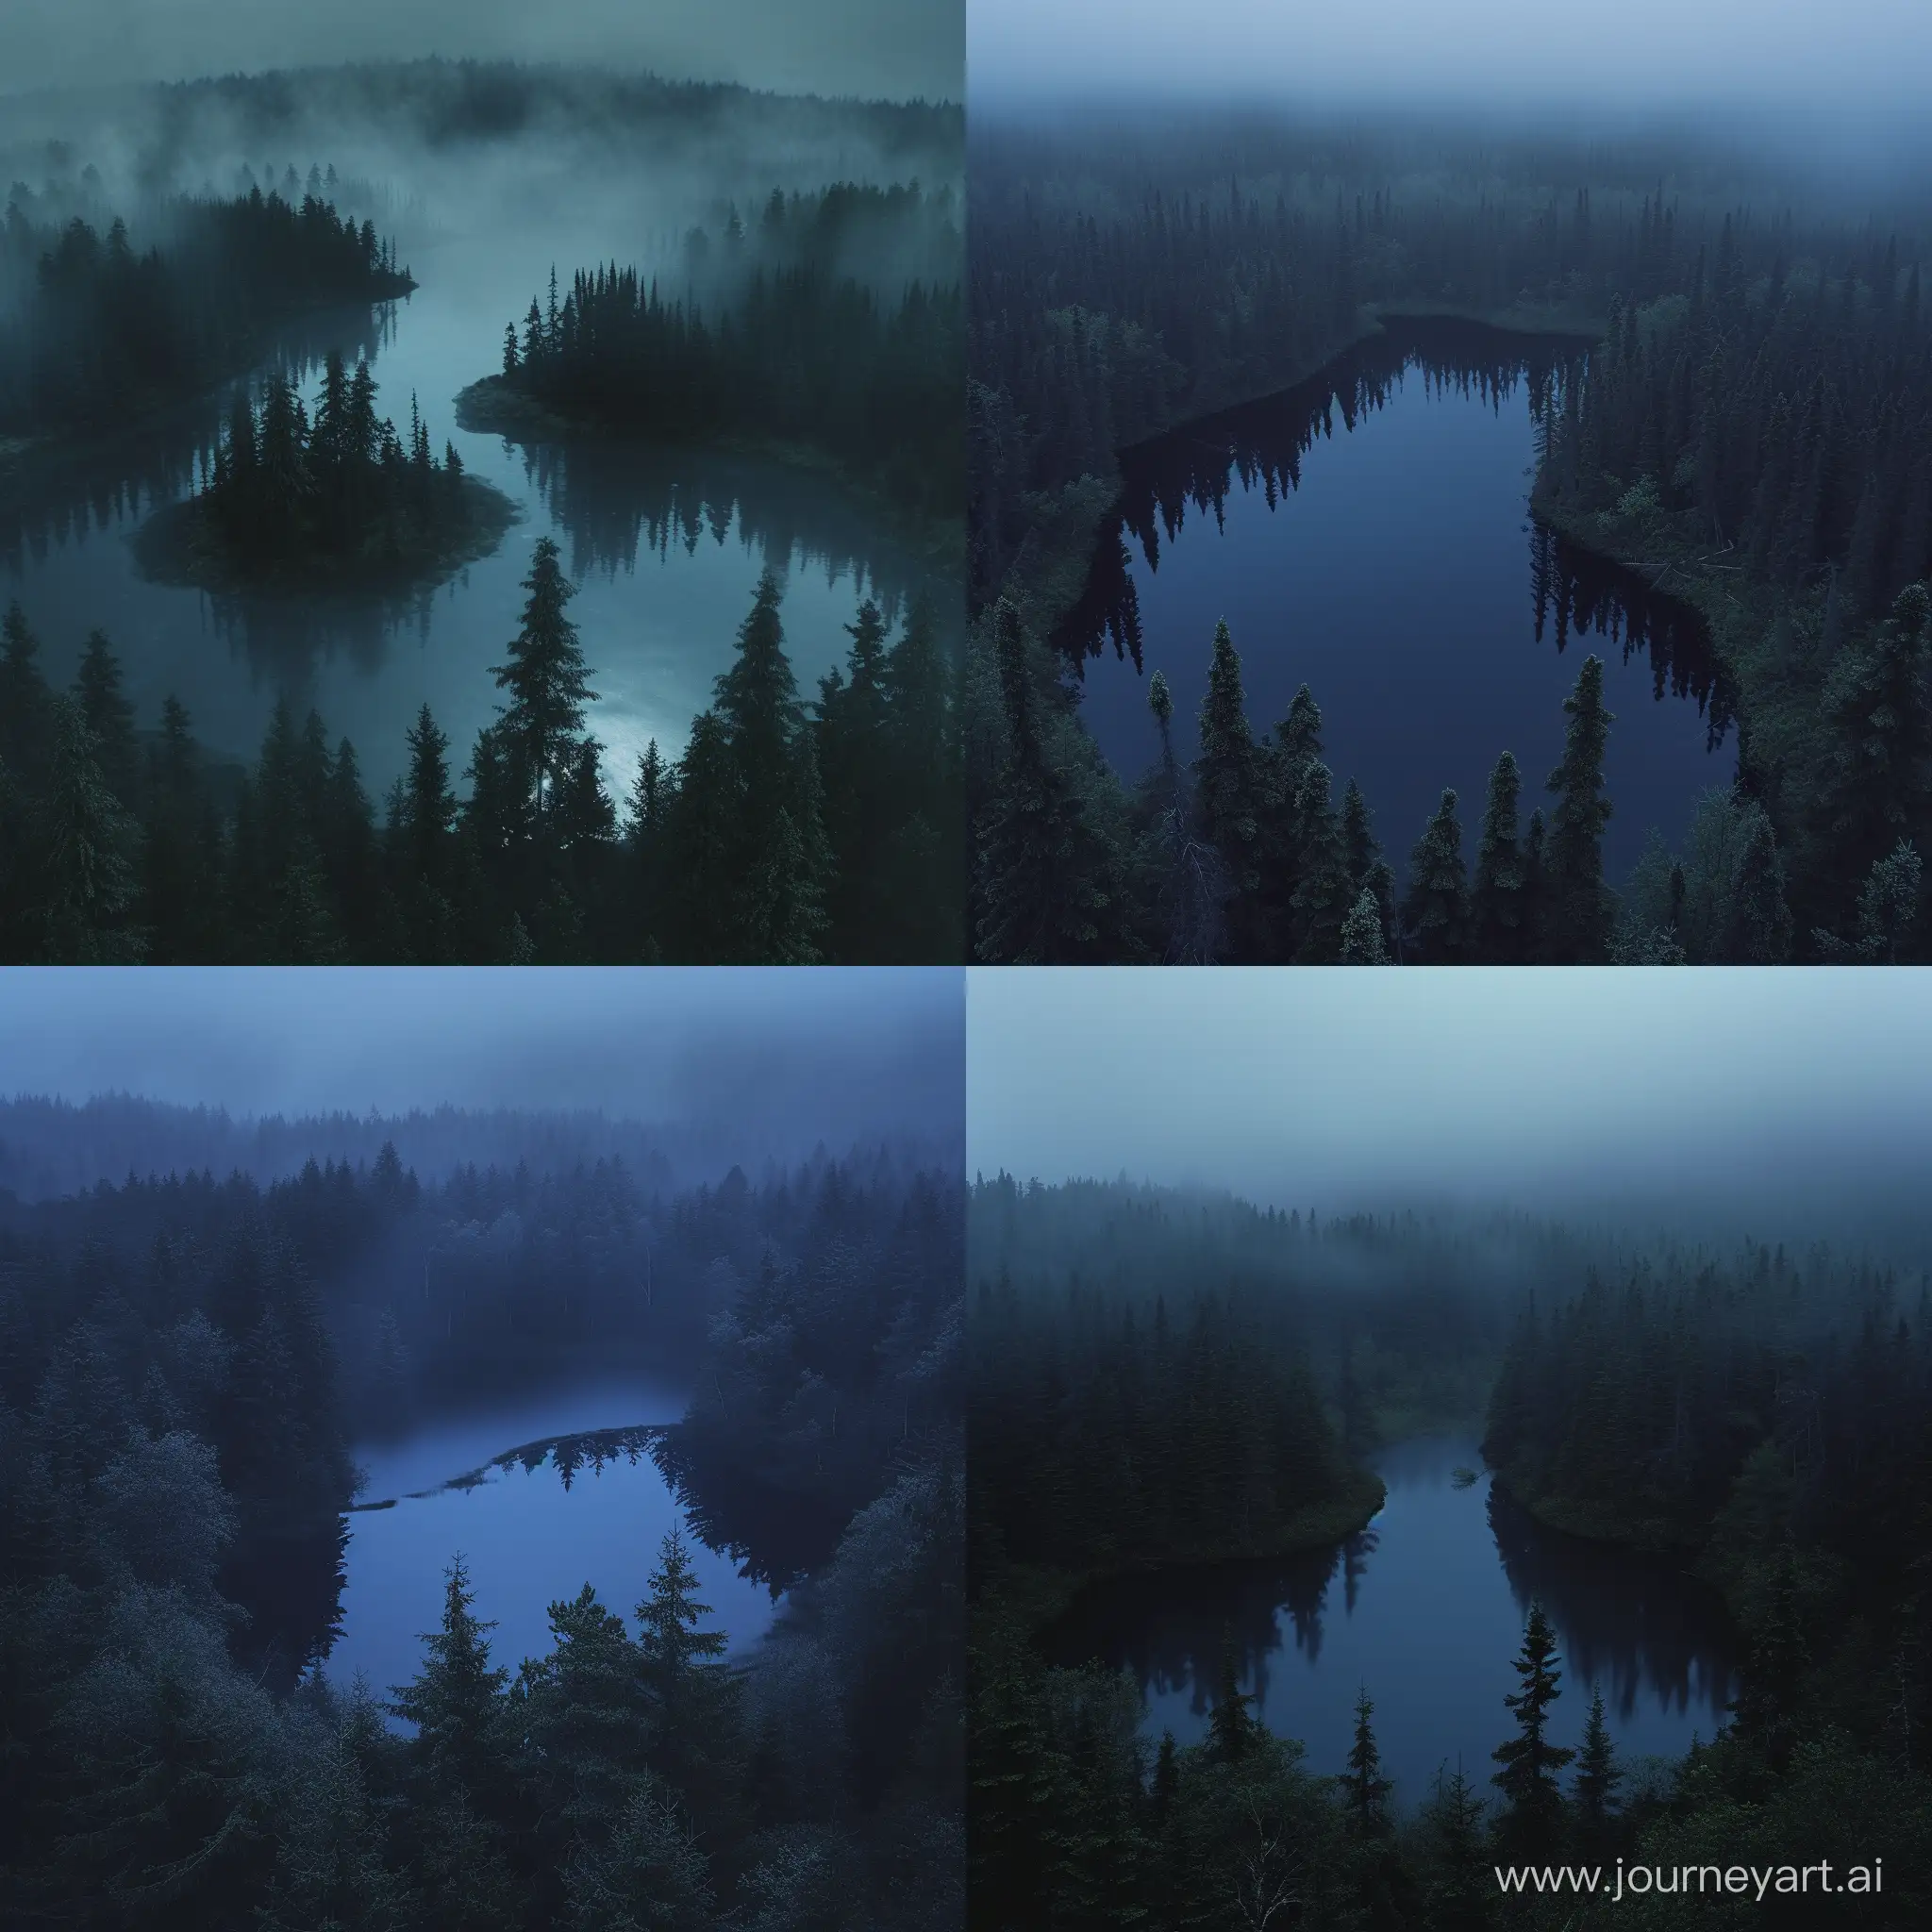 Mystical-Night-in-Spruce-Forest-with-Interconnected-Lakes